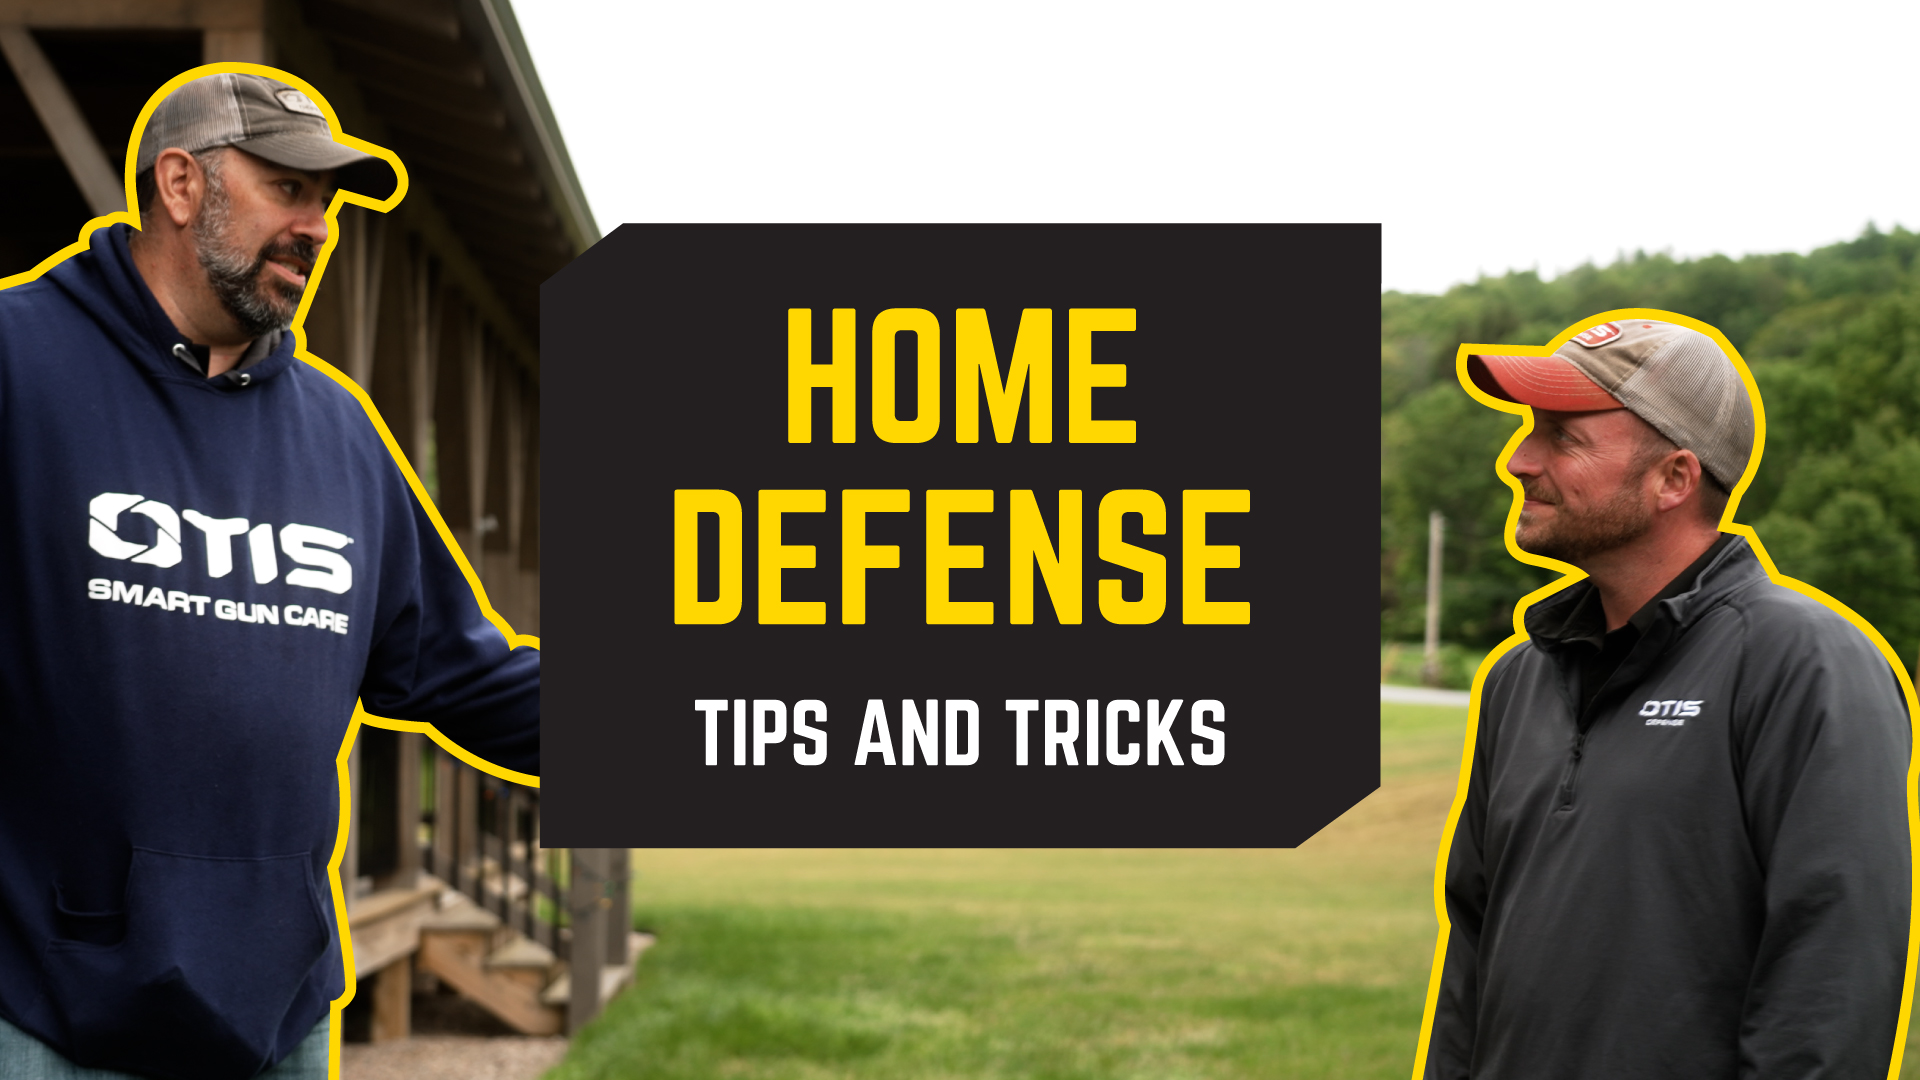 Home Defense Tips and Tricks | How to Make Your Home Safe and Secure